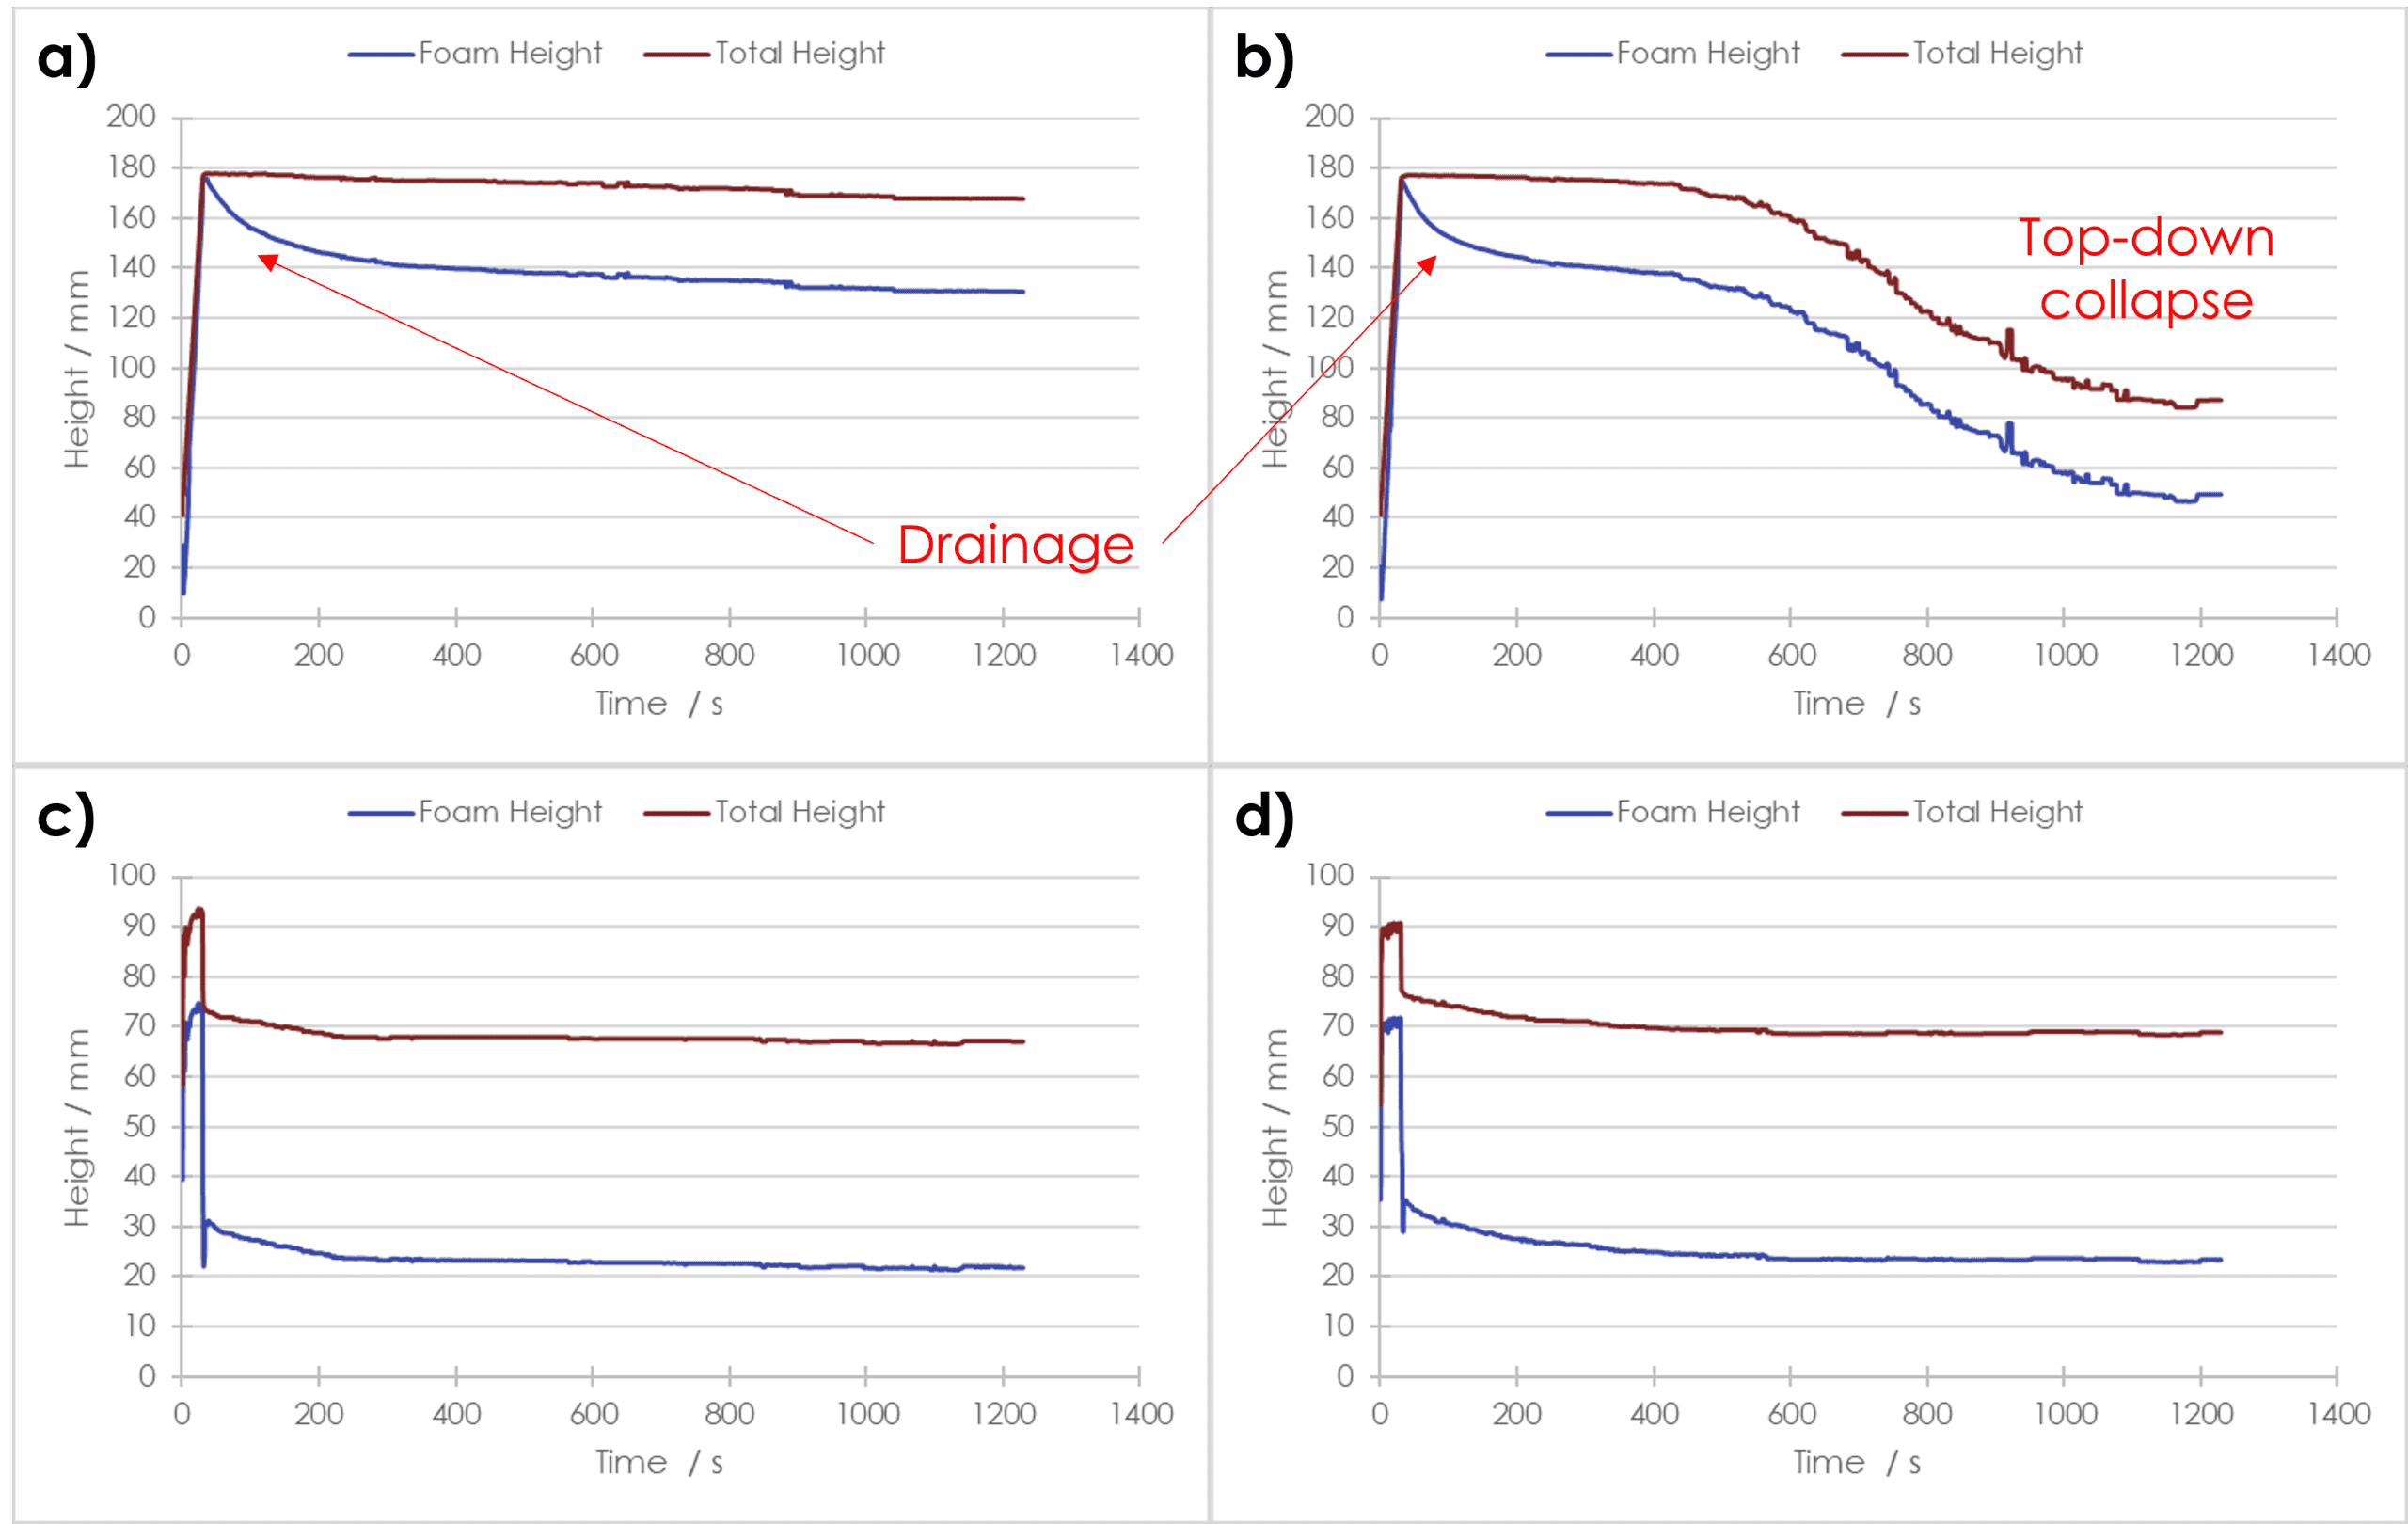 Plots for foam height vs time for samples A and B